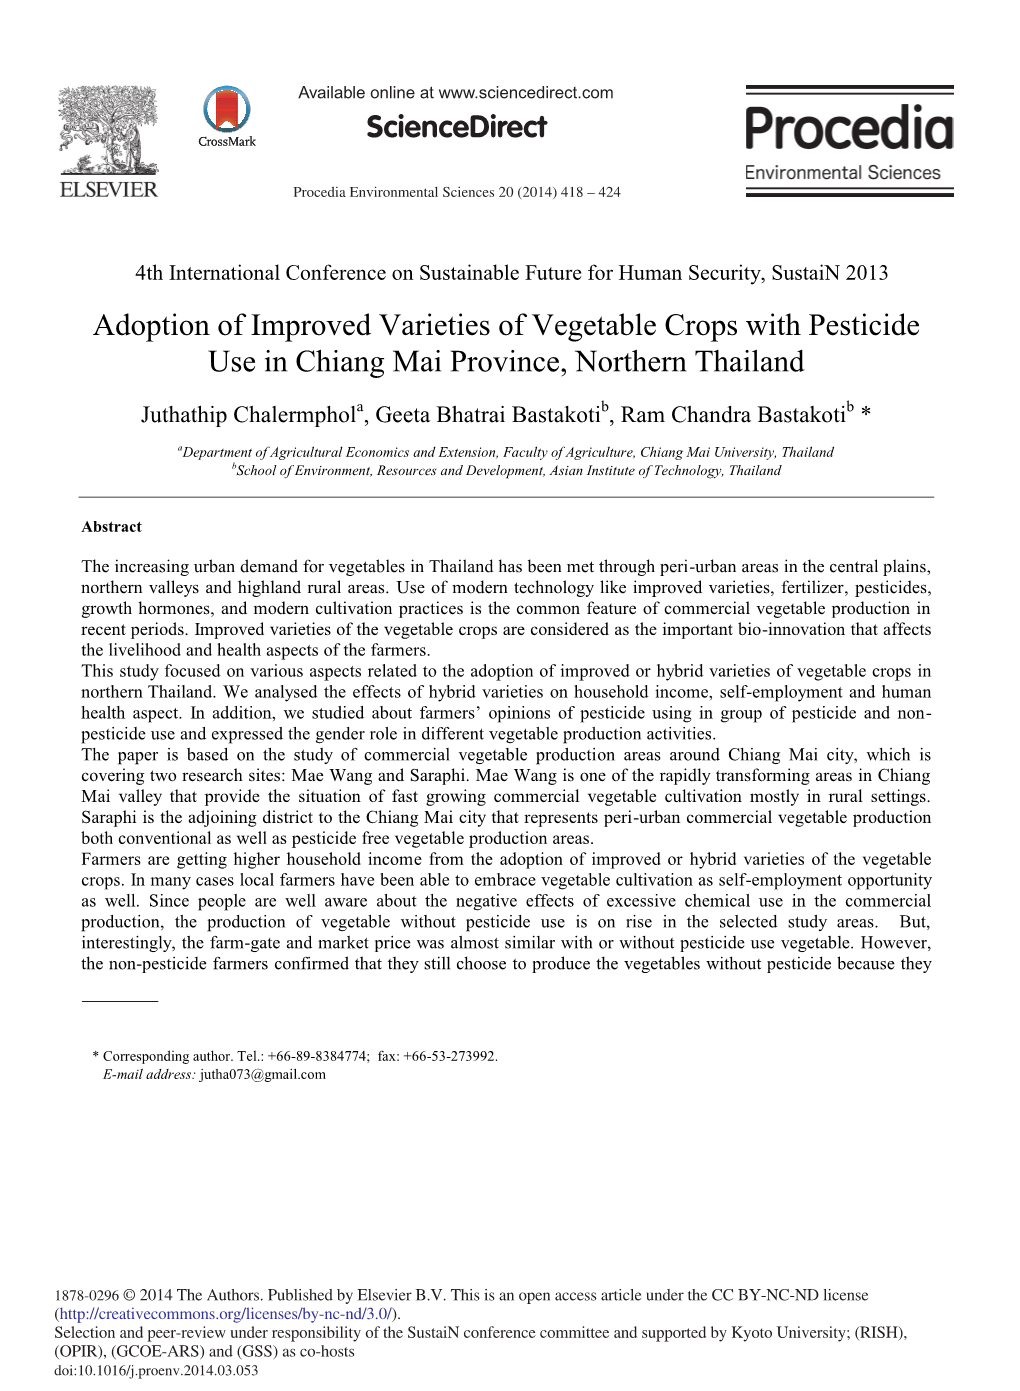 Adoption of Improved Varieties of Vegetable Crops with Pesticide Use in Chiang Mai Province, Northern Thailand